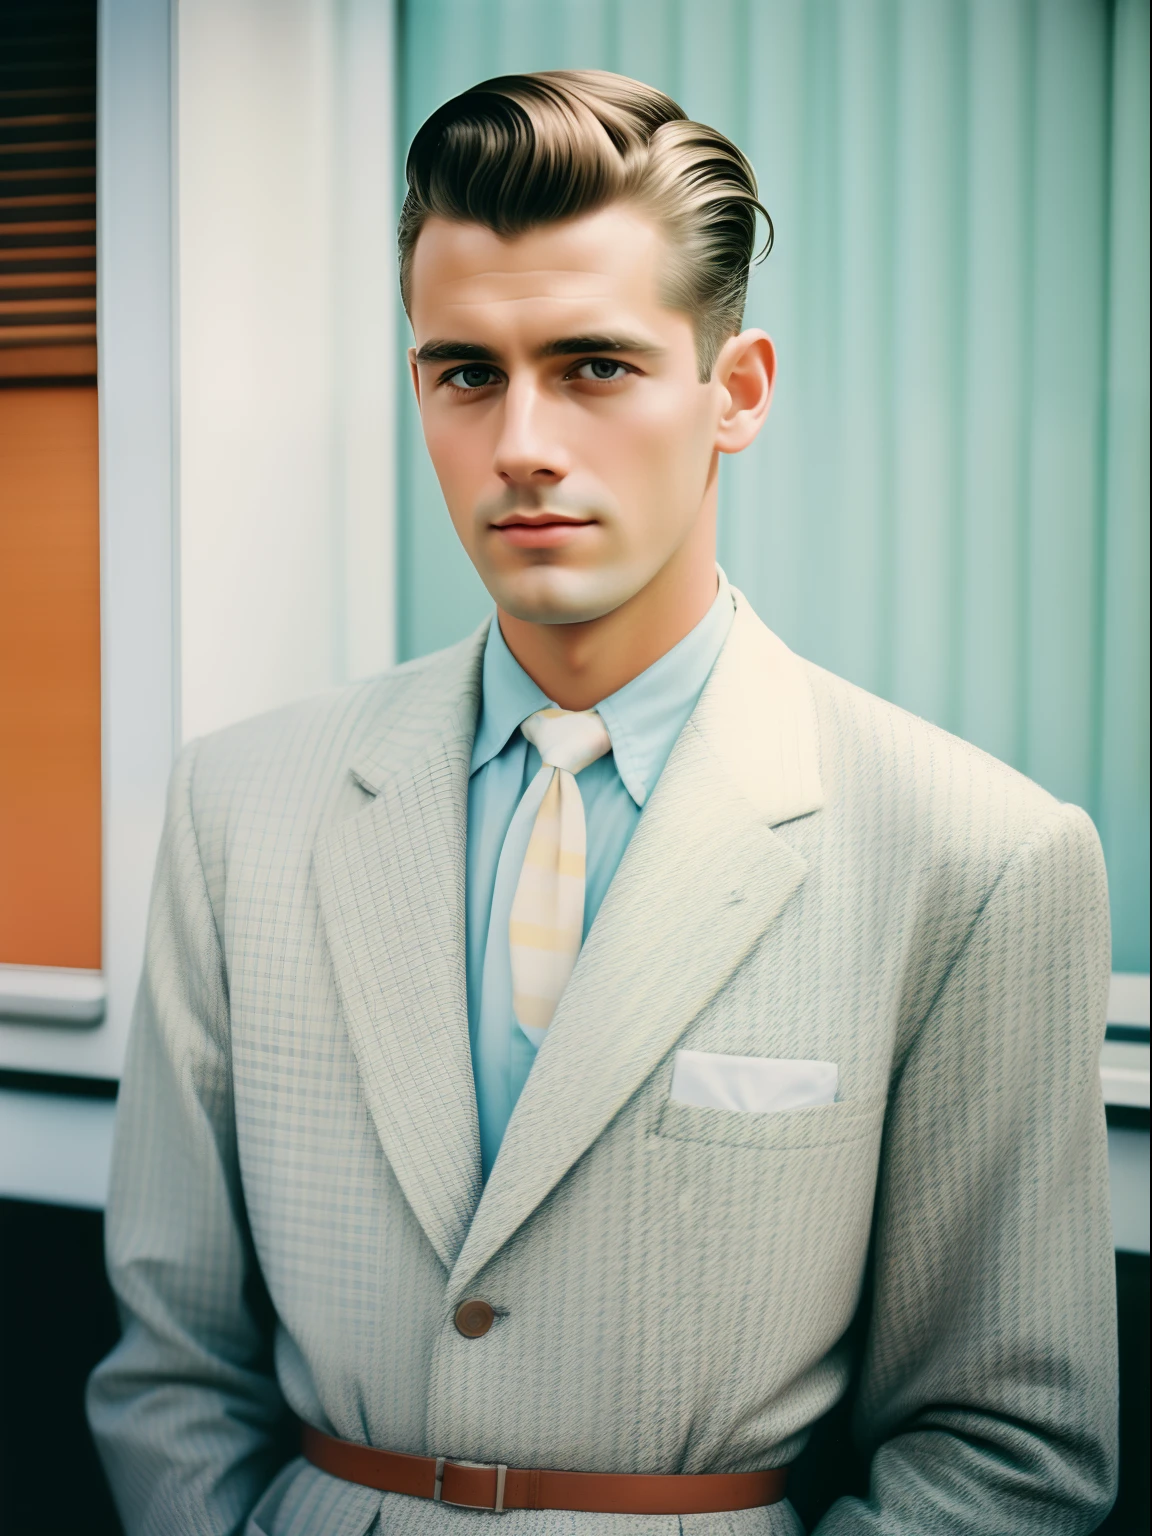 Portrait of a man, Wearing a pastel suit, The photo was taken with an analog camera in the 1950s. Person wearing traditional 50s style clothes々, Who has a traditional 50s haircut々, Photo by William Eggleston, Appearance of the 50s, Highly detailed, slightly faded pastel colors, Slightly blurred, Slightly grainy, film photography